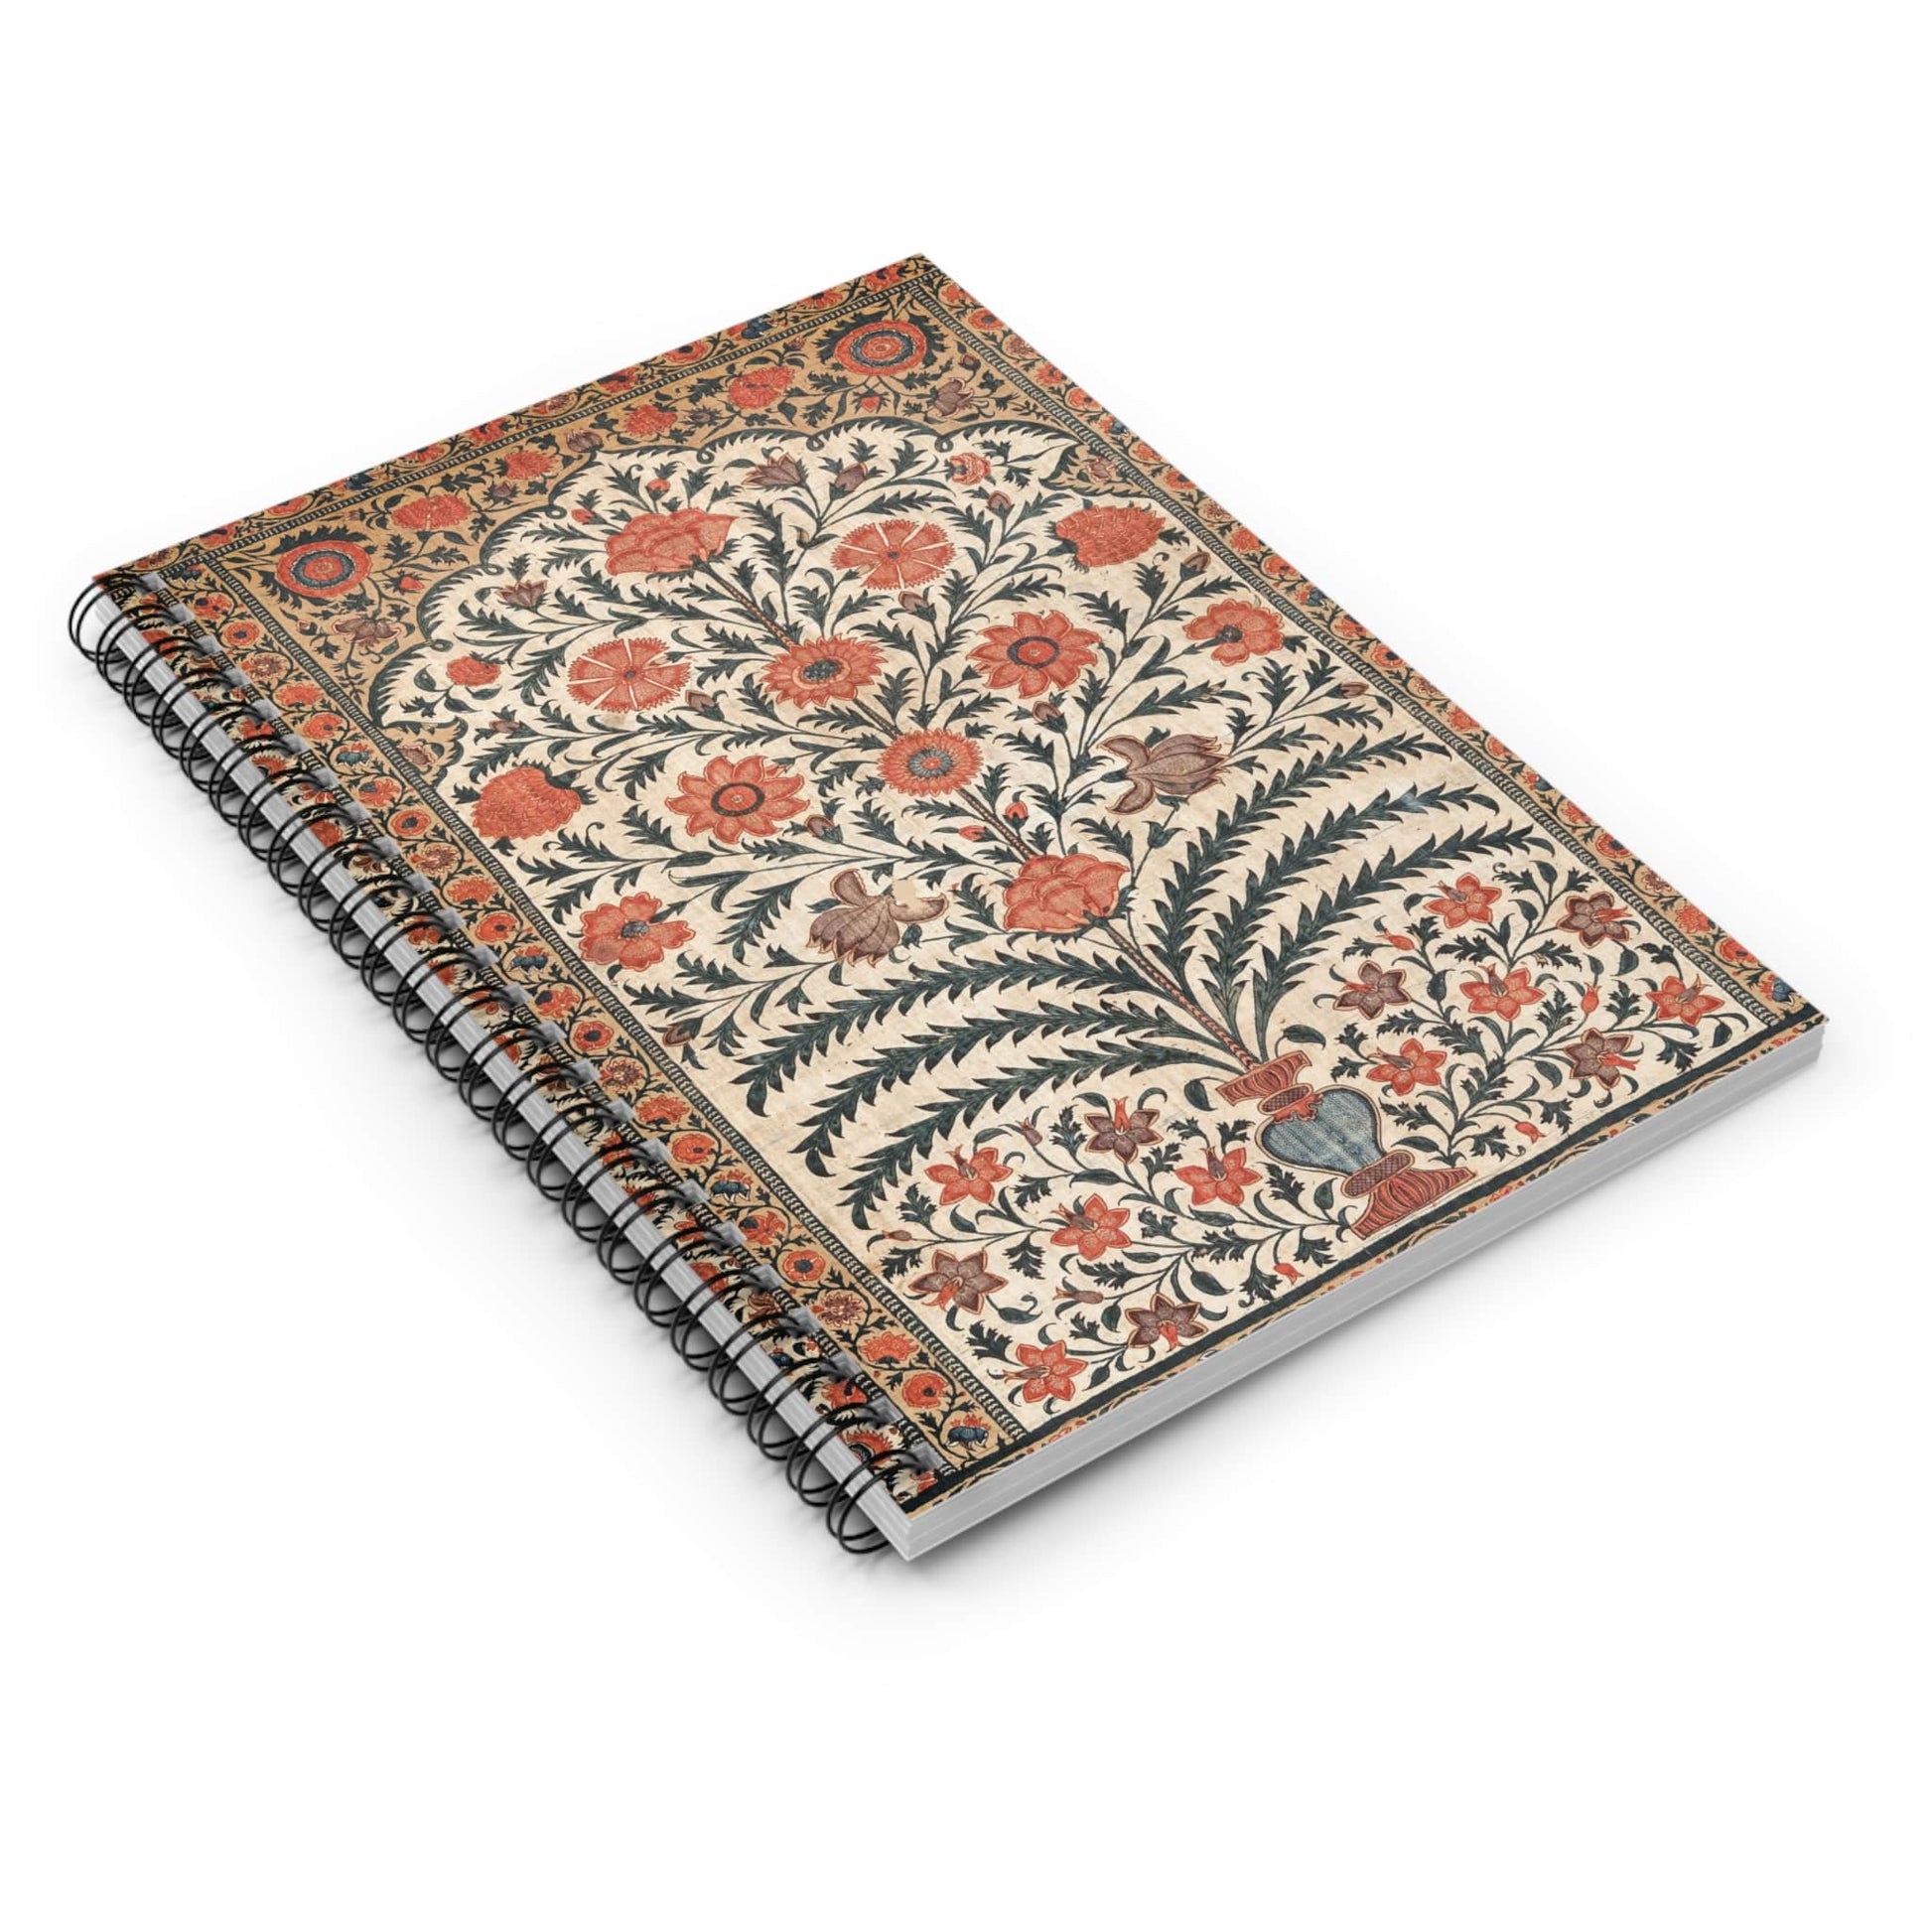 Flower Pattern Spiral Notebook Laying Flat on White Surface